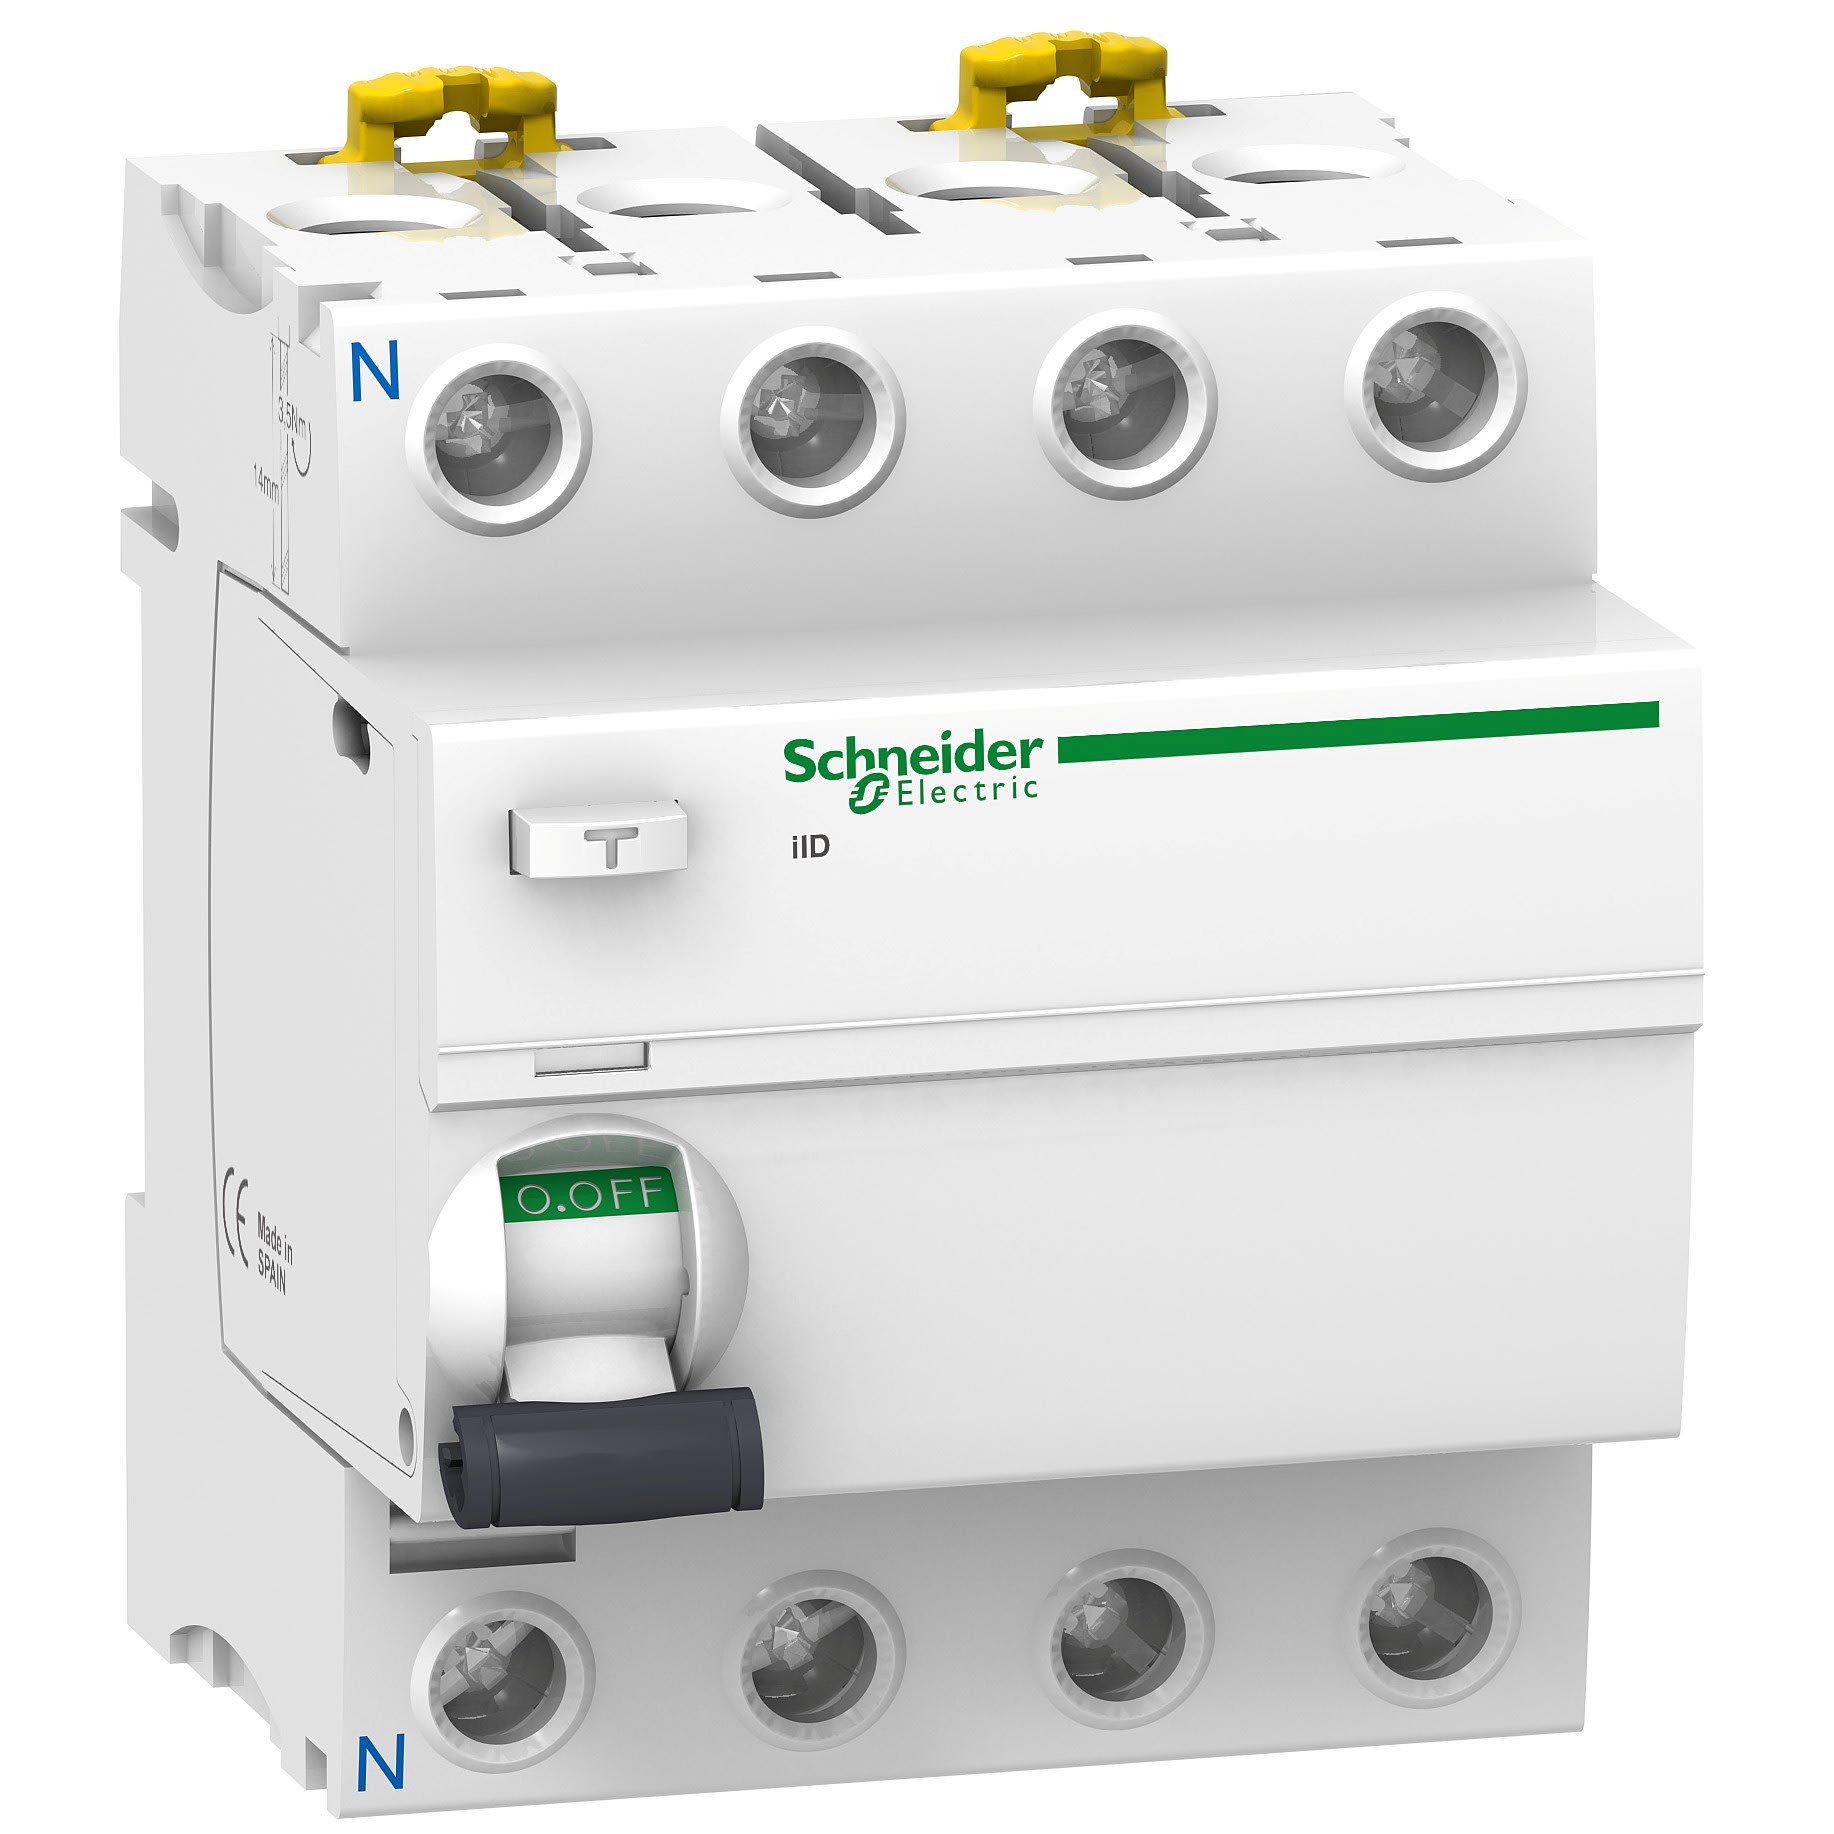 Schneider Electric - Acti9, iID interrupteur differentiel 4P 40A 300mA selectif type Asi